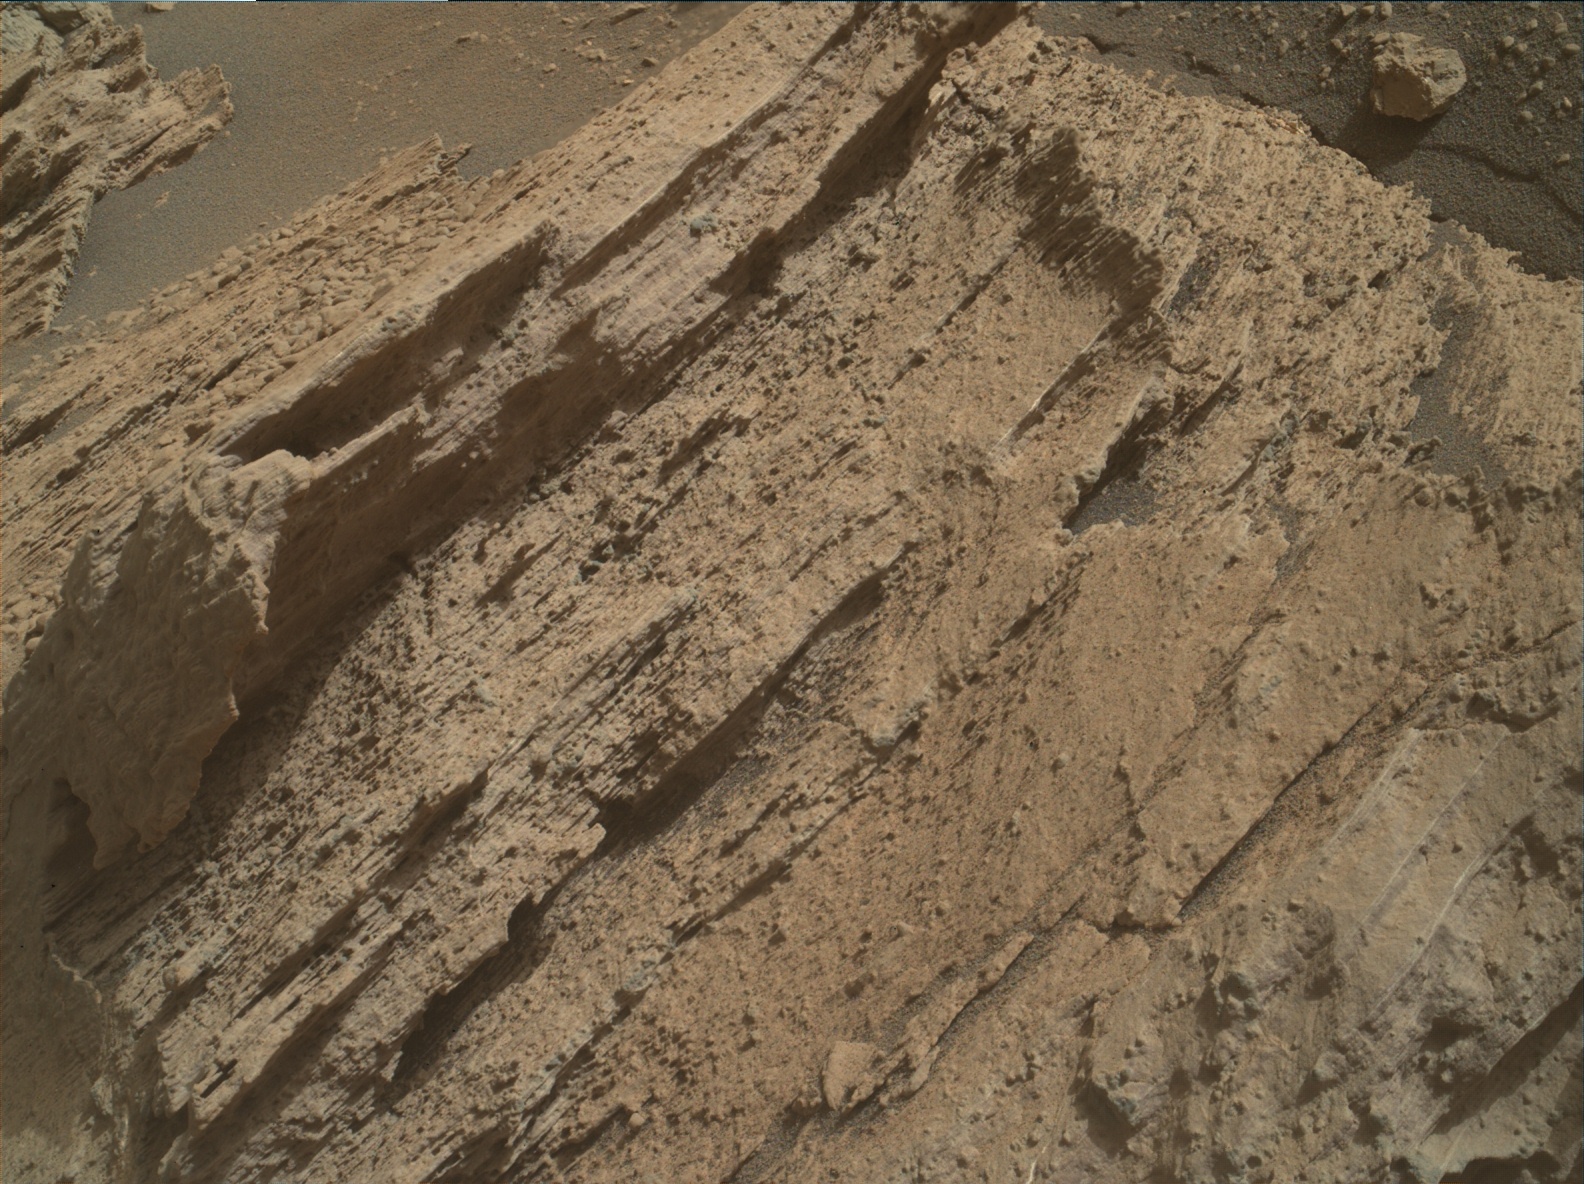 Nasa's Mars rover Curiosity acquired this image using its Mars Hand Lens Imager (MAHLI) on Sol 2586